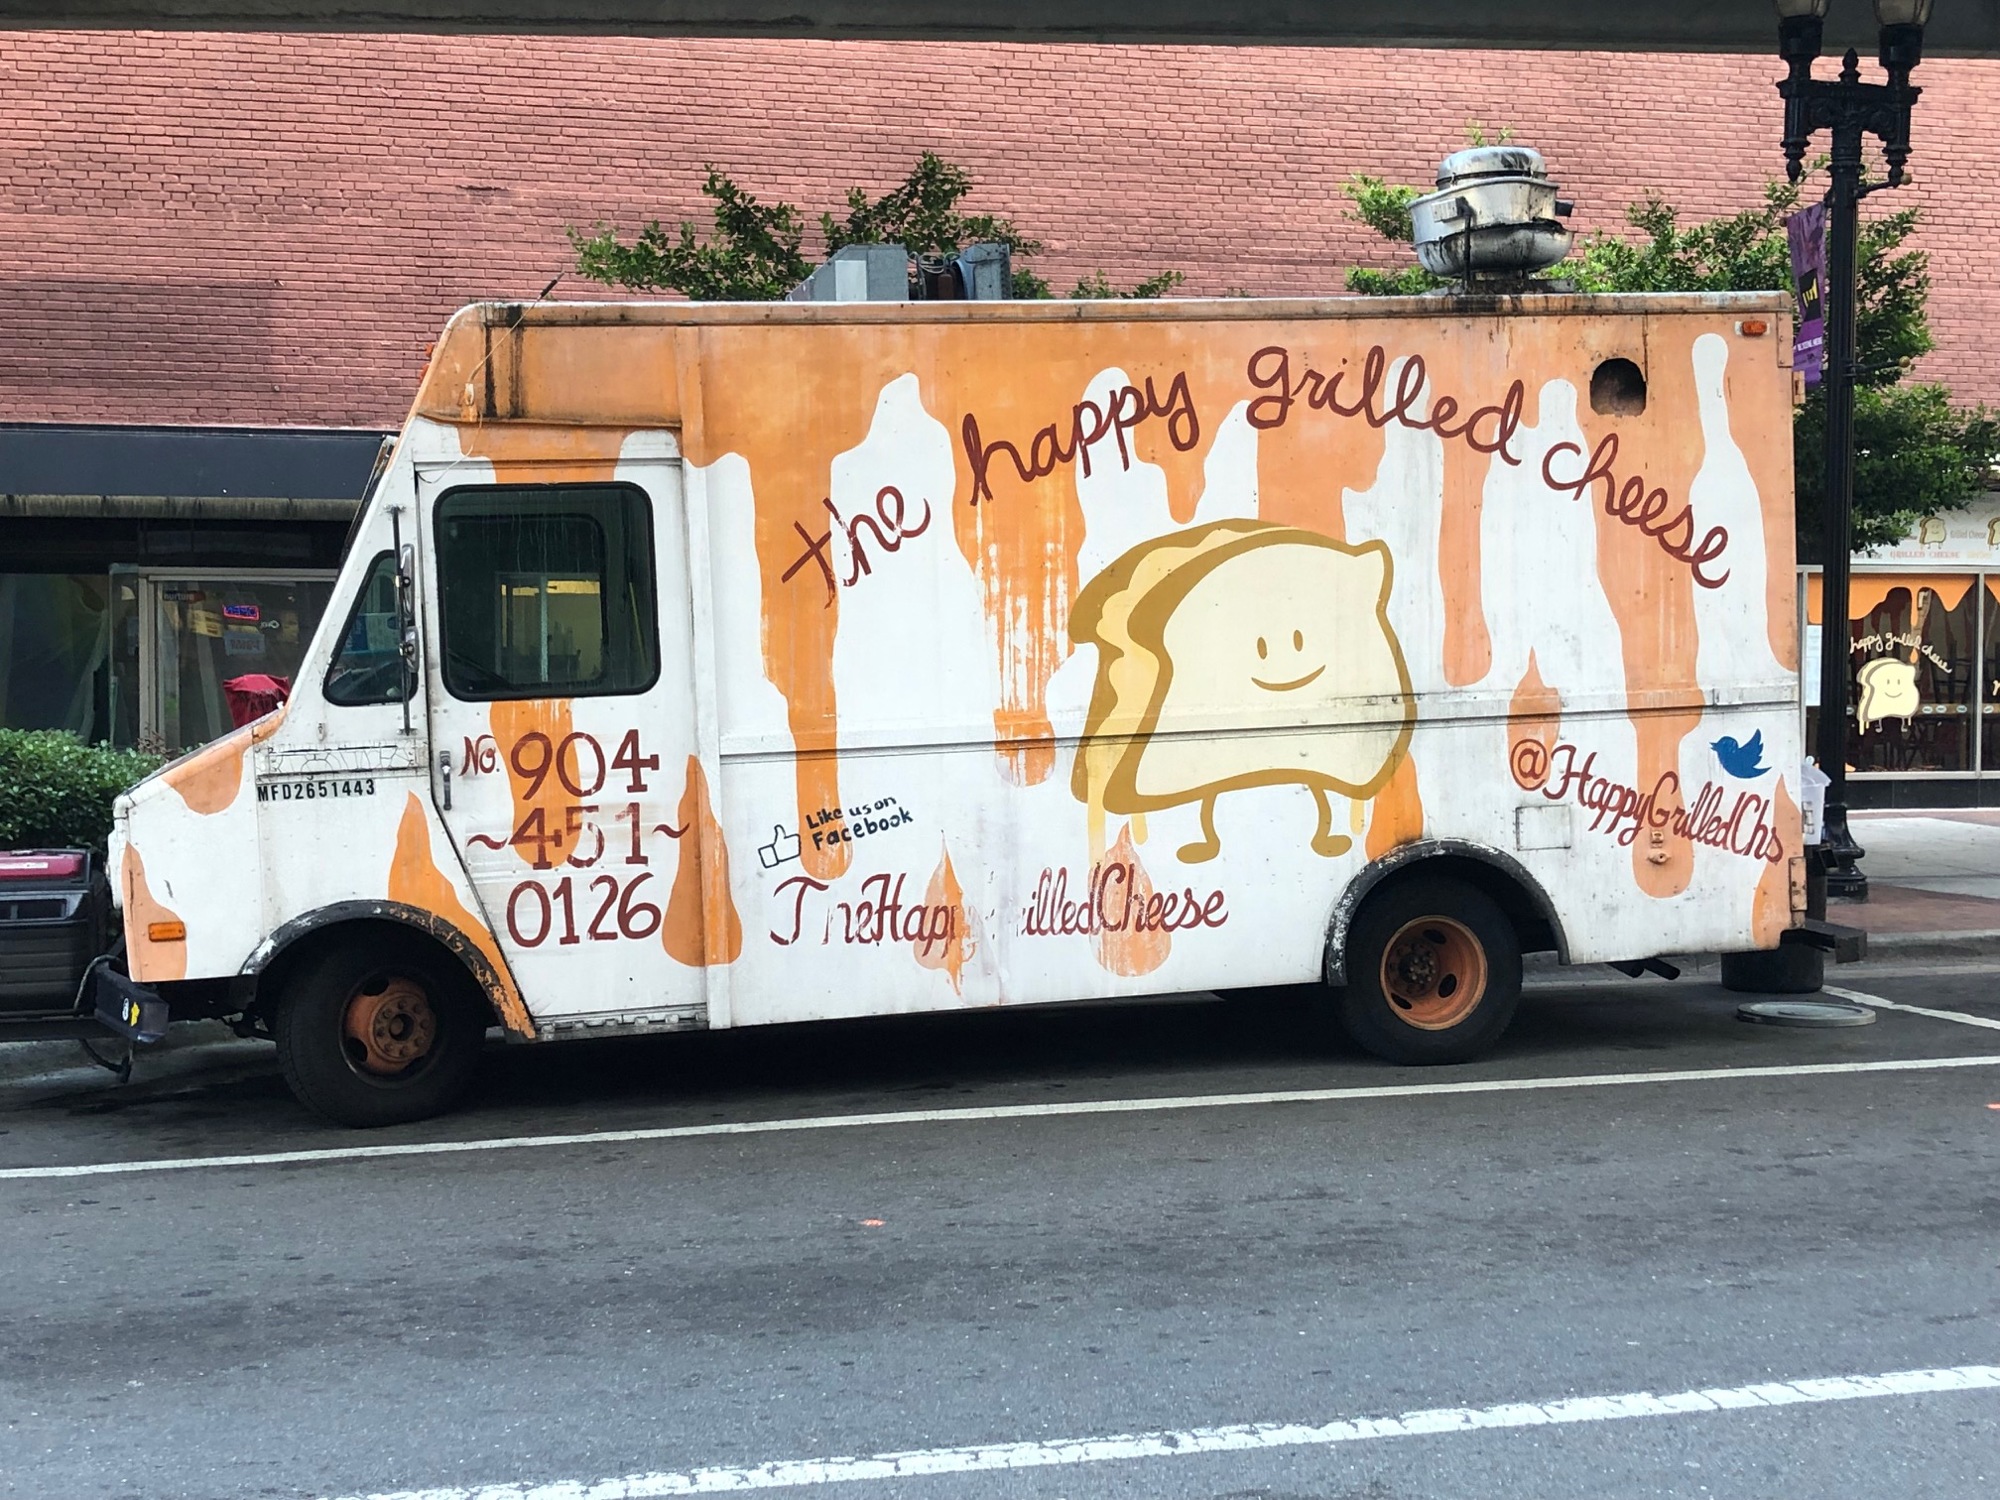 The Happy Grilled Cheese food truck operates around town. Its schedule is on Facebook.